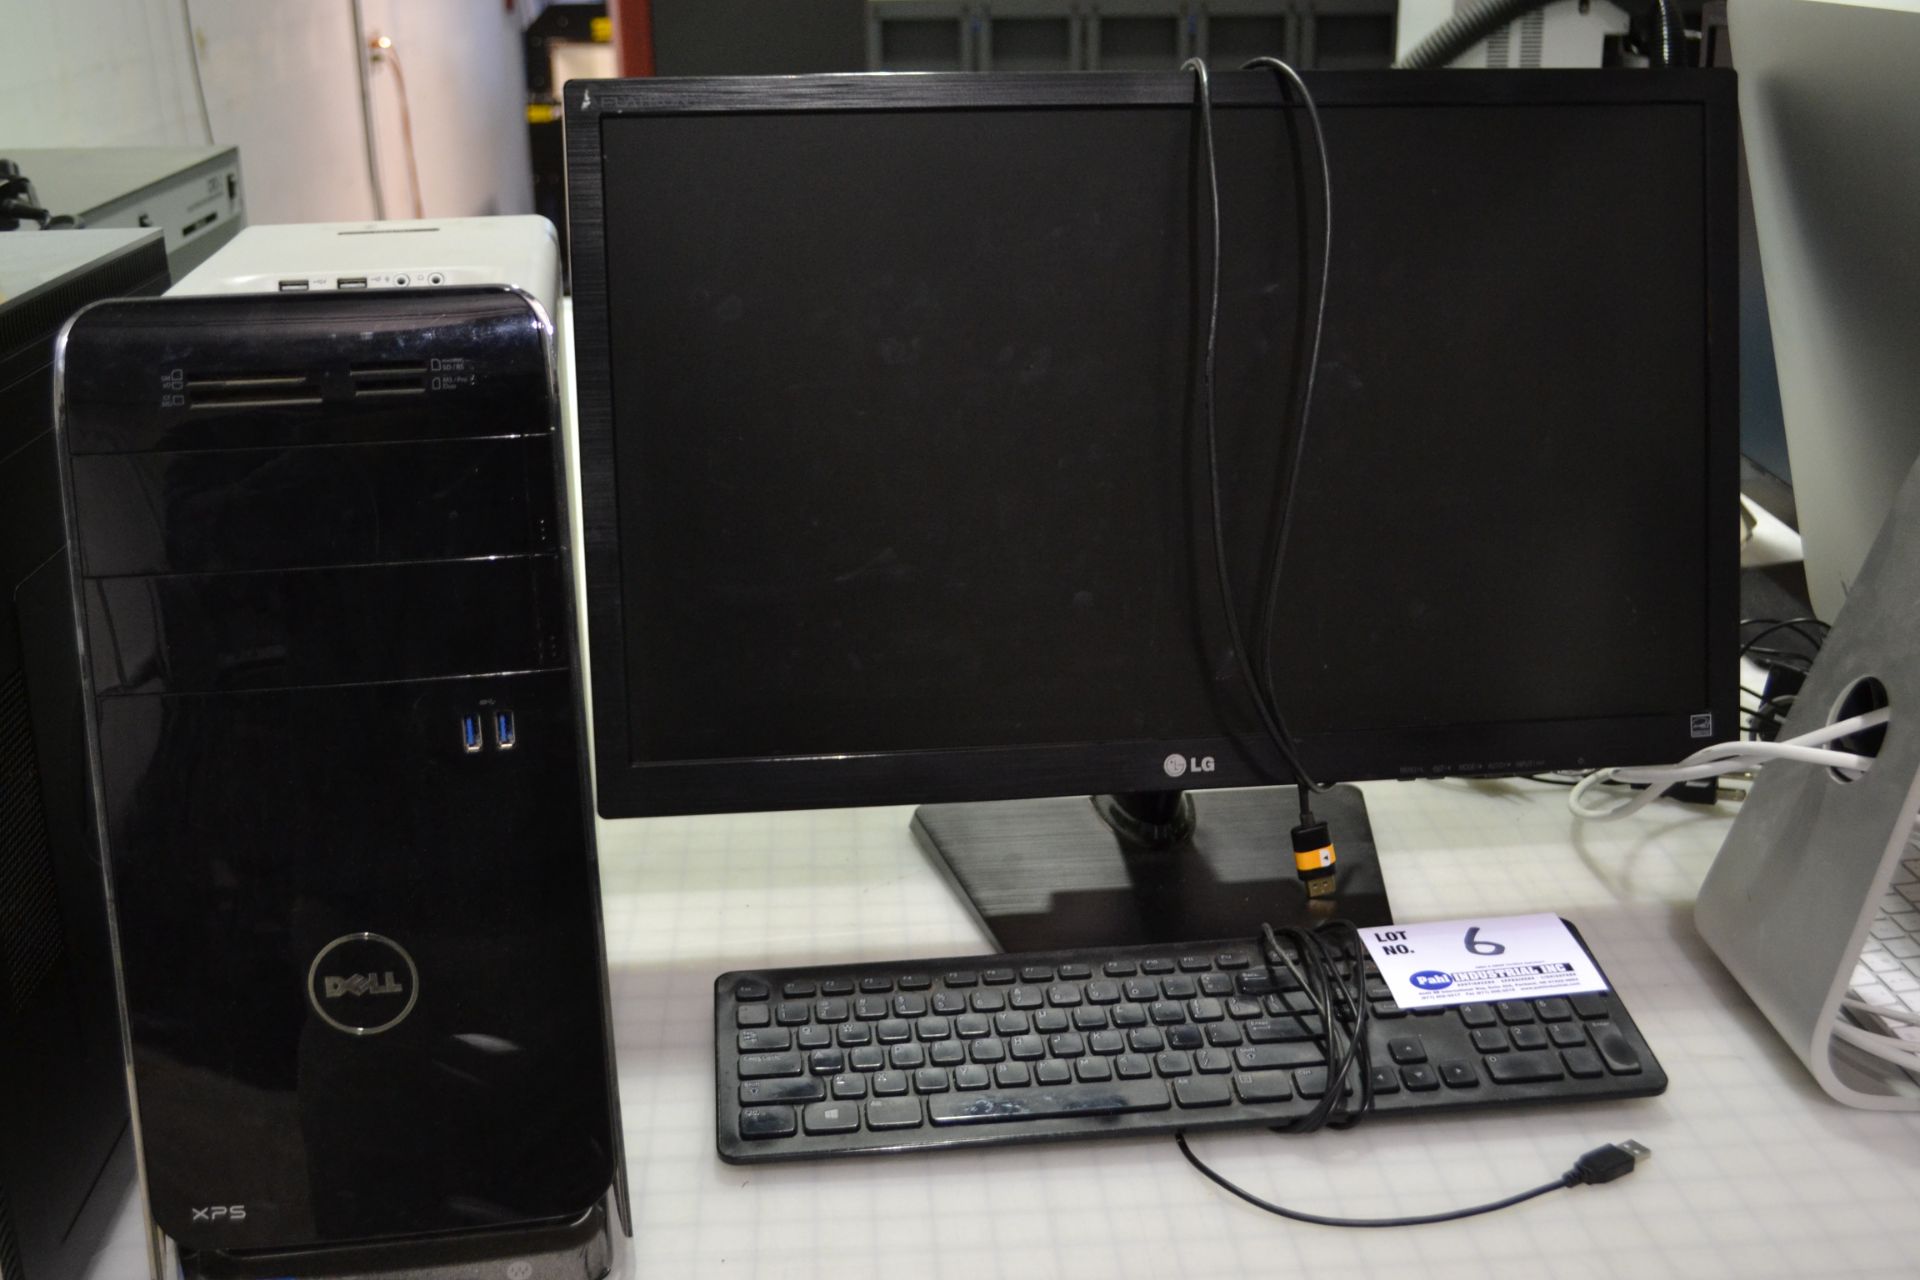 Dell XPS Processor w/Intel Core i7 c/w LG 27'' Monitor, Keyboard and Mouse - Image 2 of 2